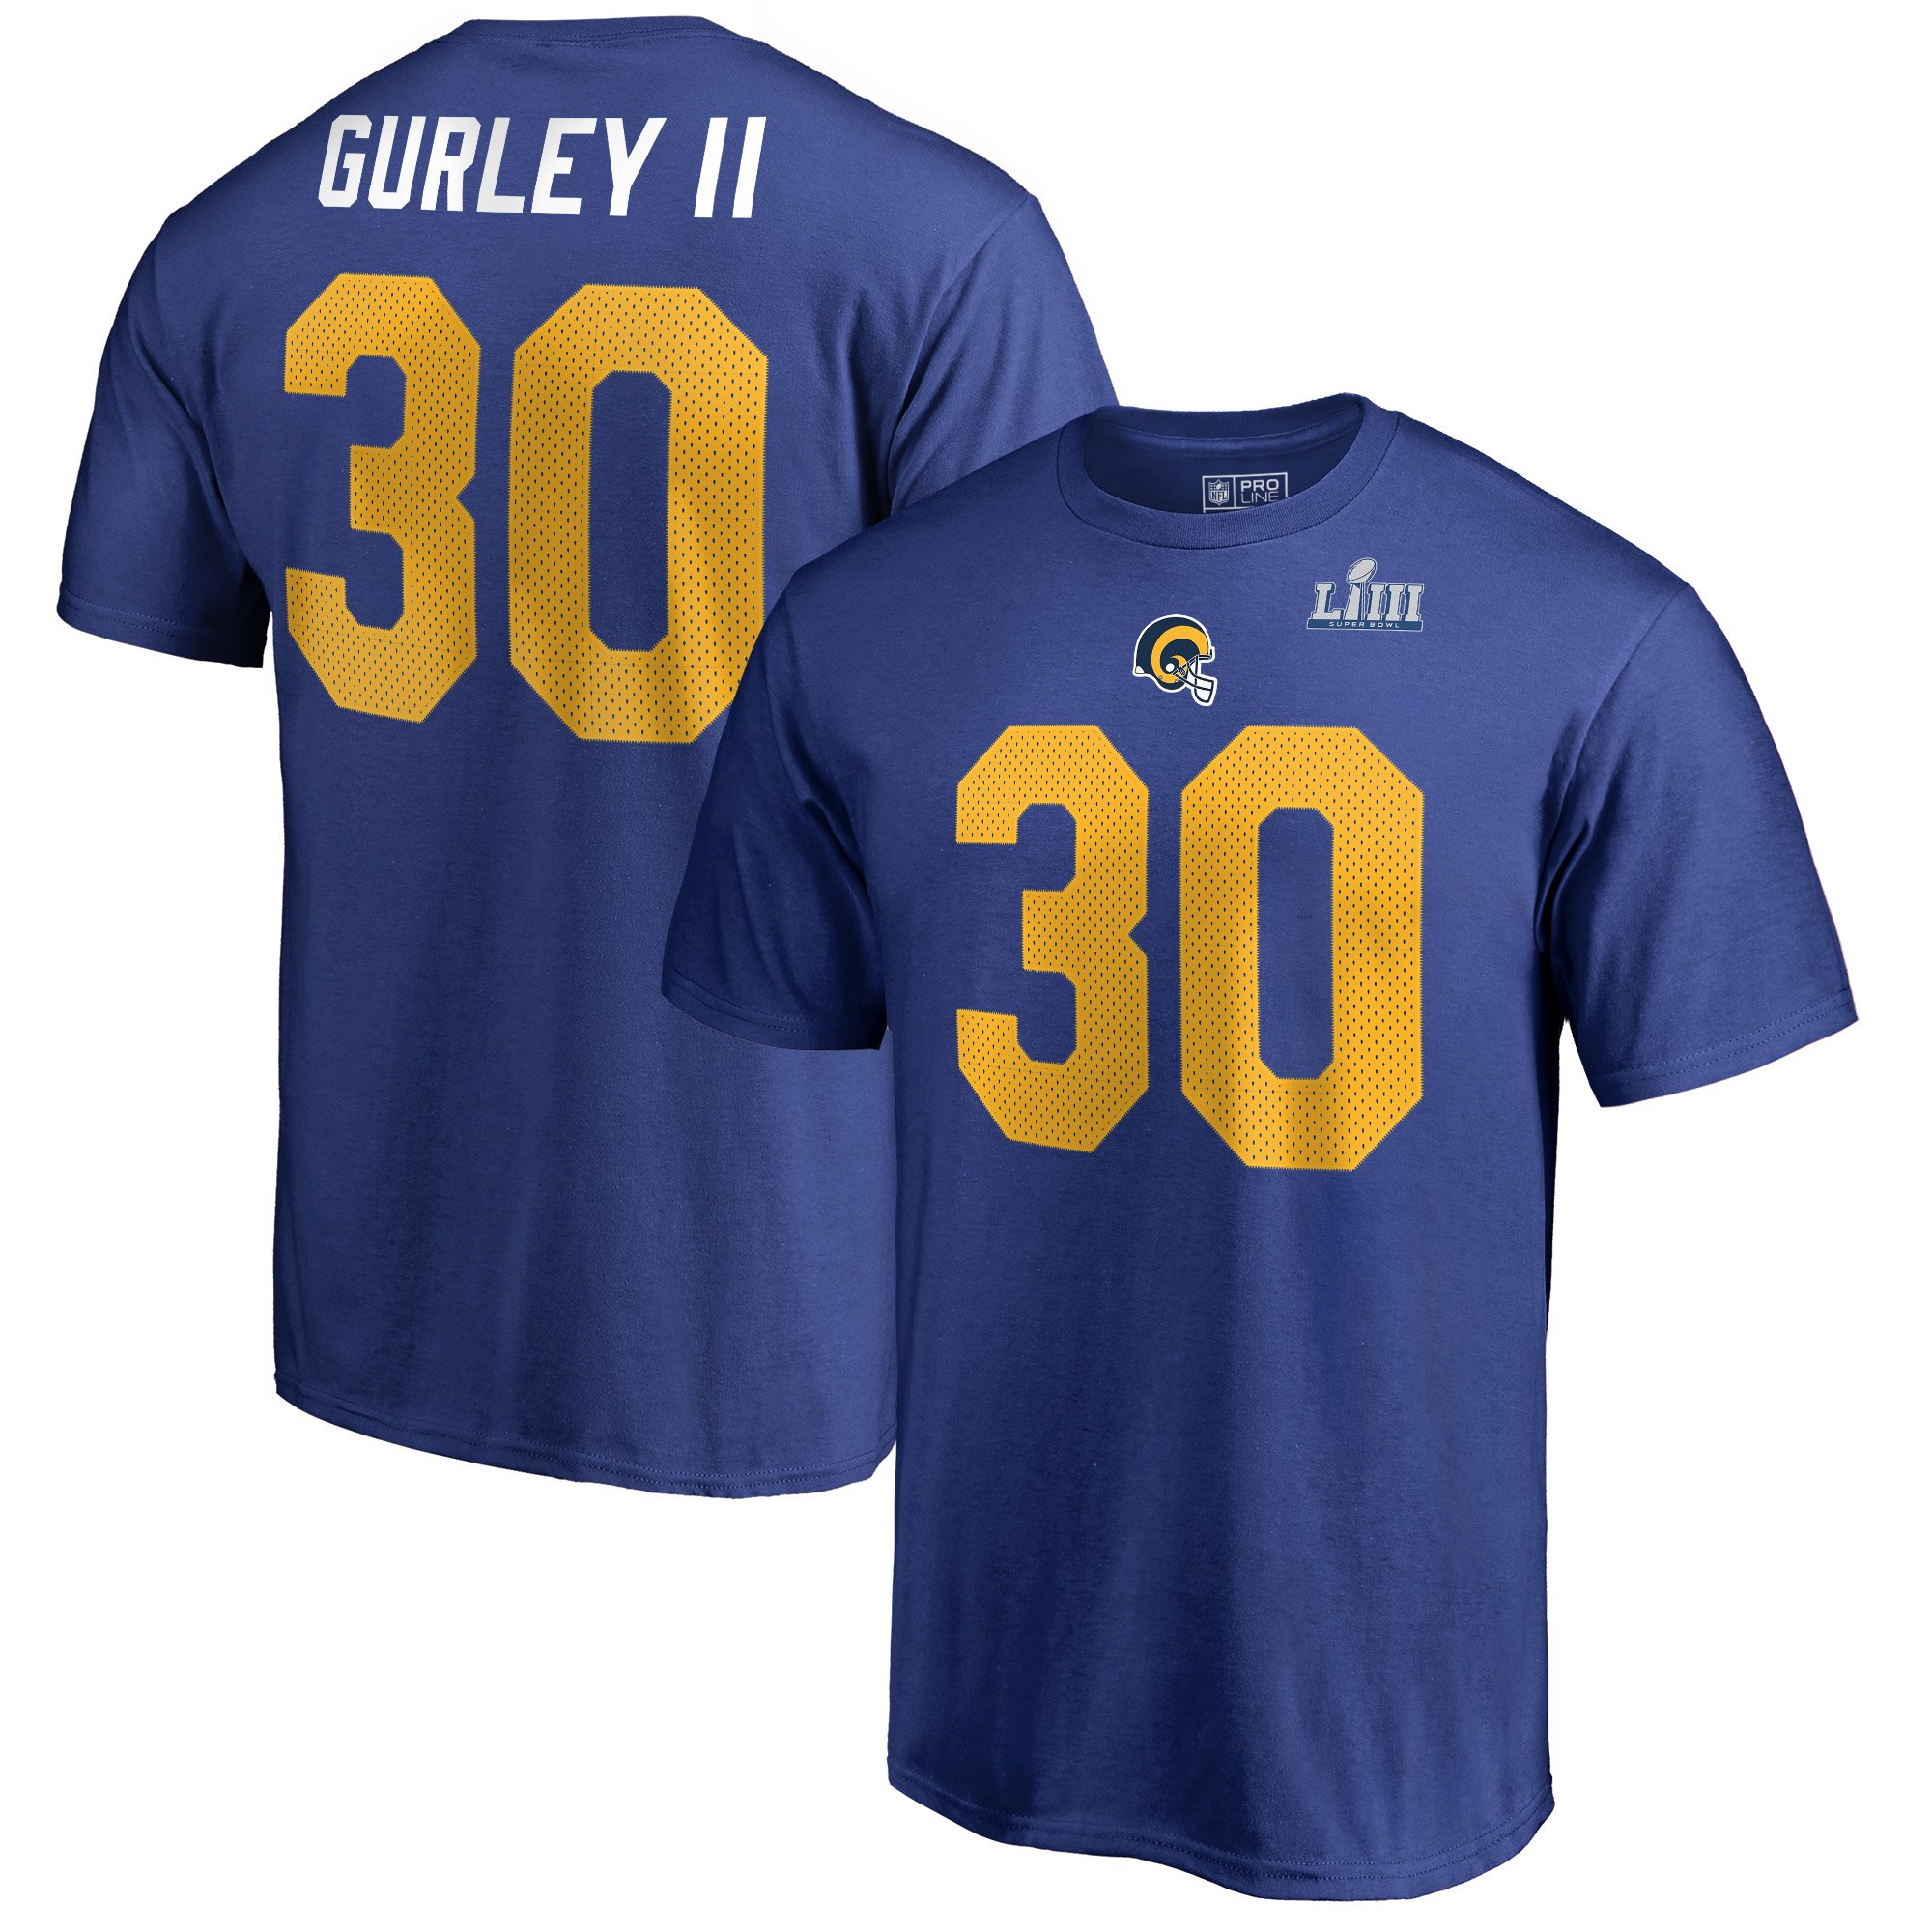 Los Angeles Rams 30 Todd Gurley II NFL Pro Line by Fanatics Branded Super Bowl LIII Bound Eligible Receiver Name & Number T-Shirt Royal